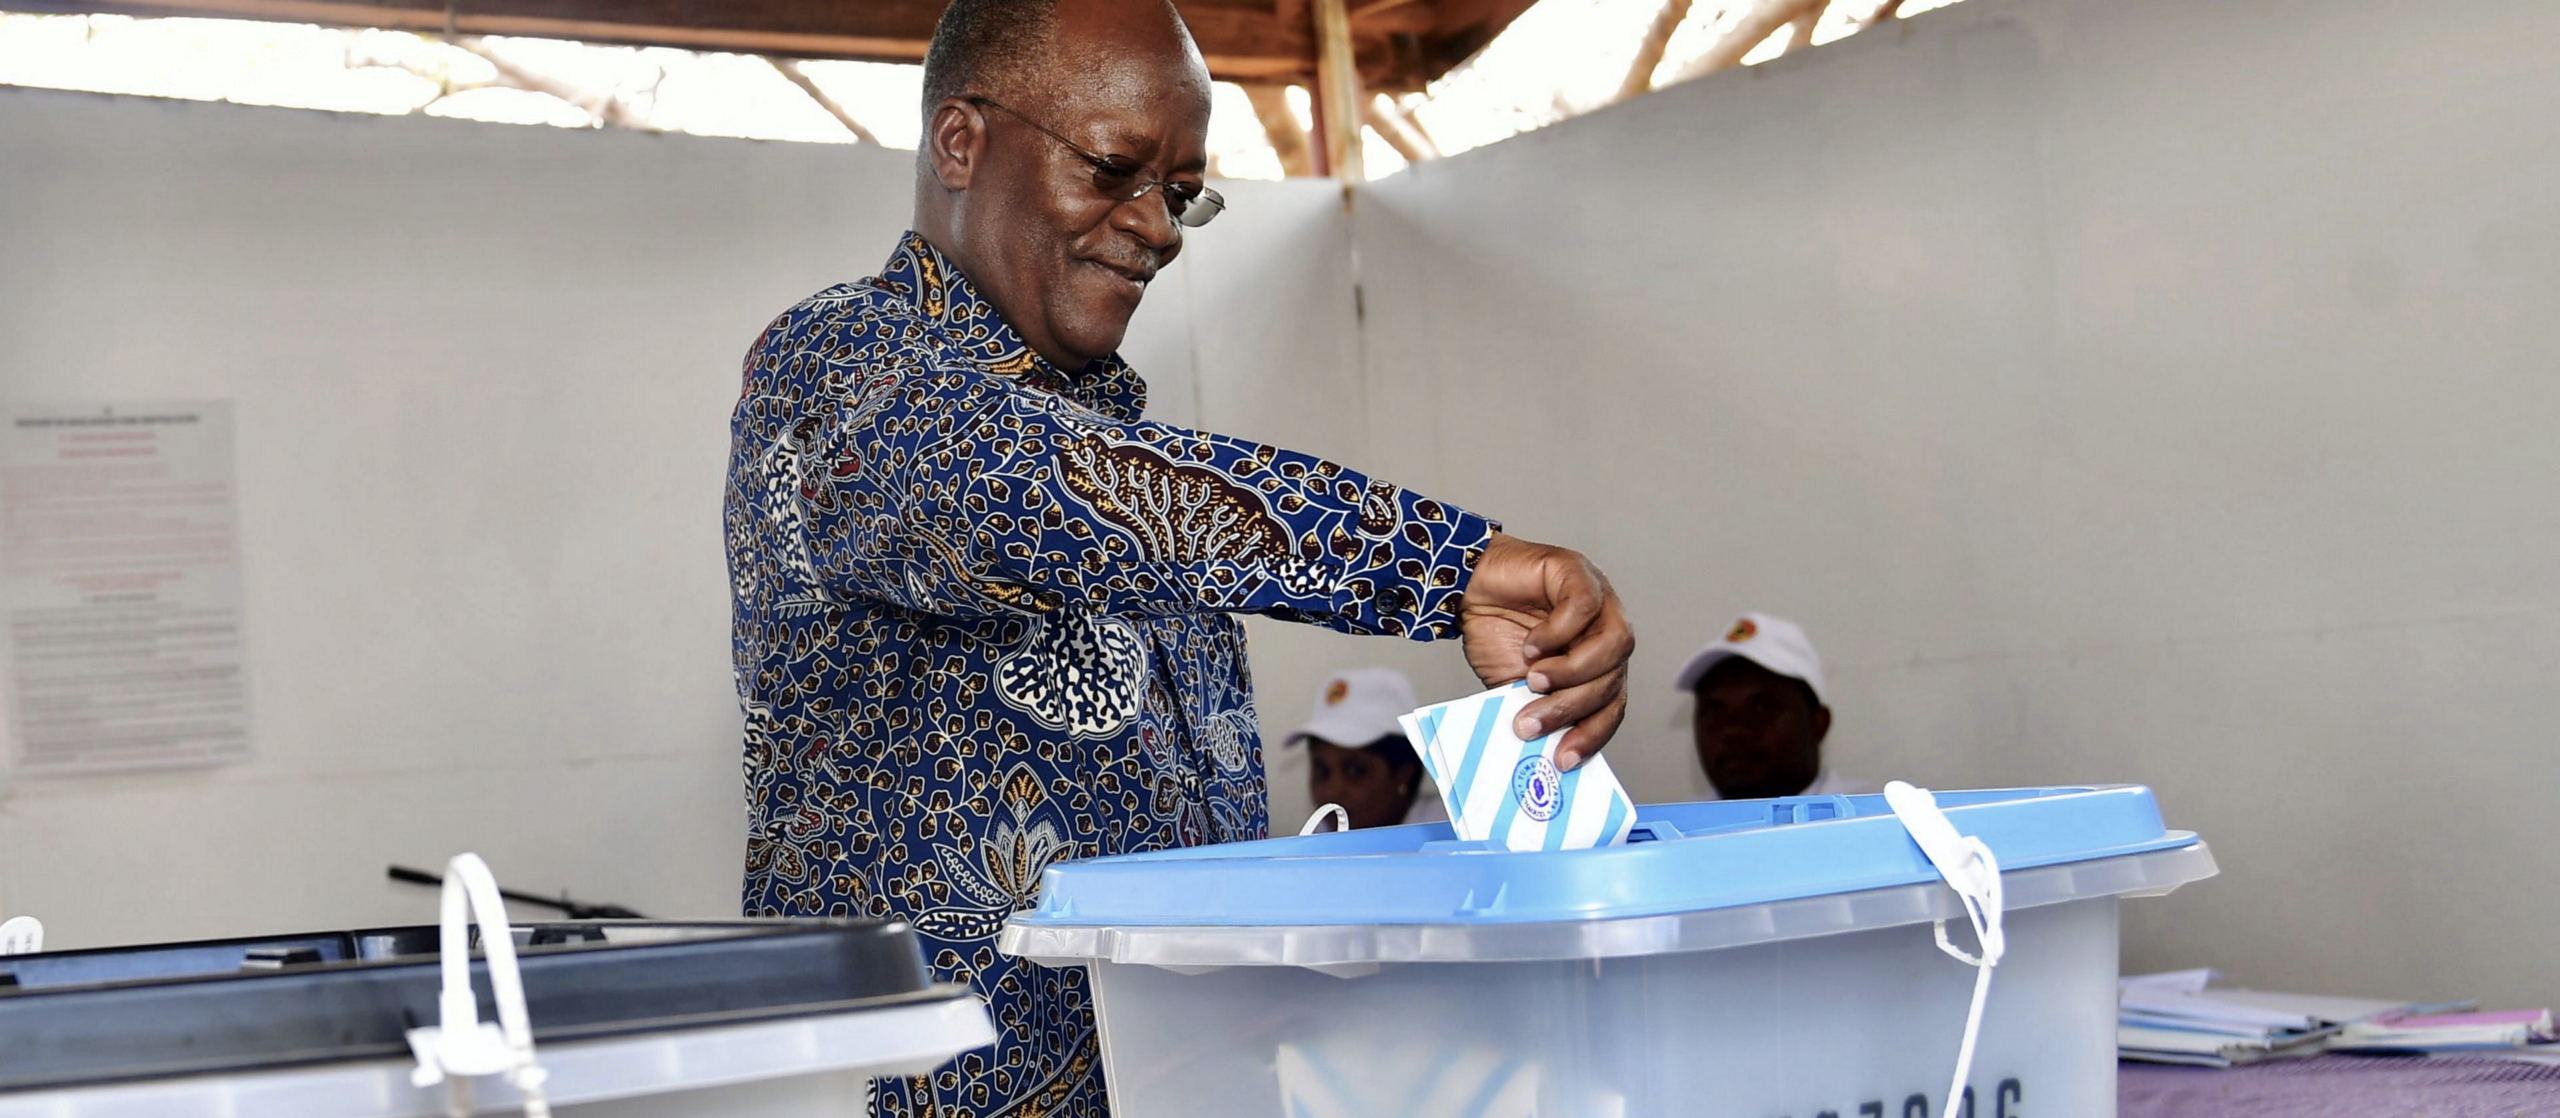 Tanzanian social media users post evidence of alleged election rigging amidst internet disruptions